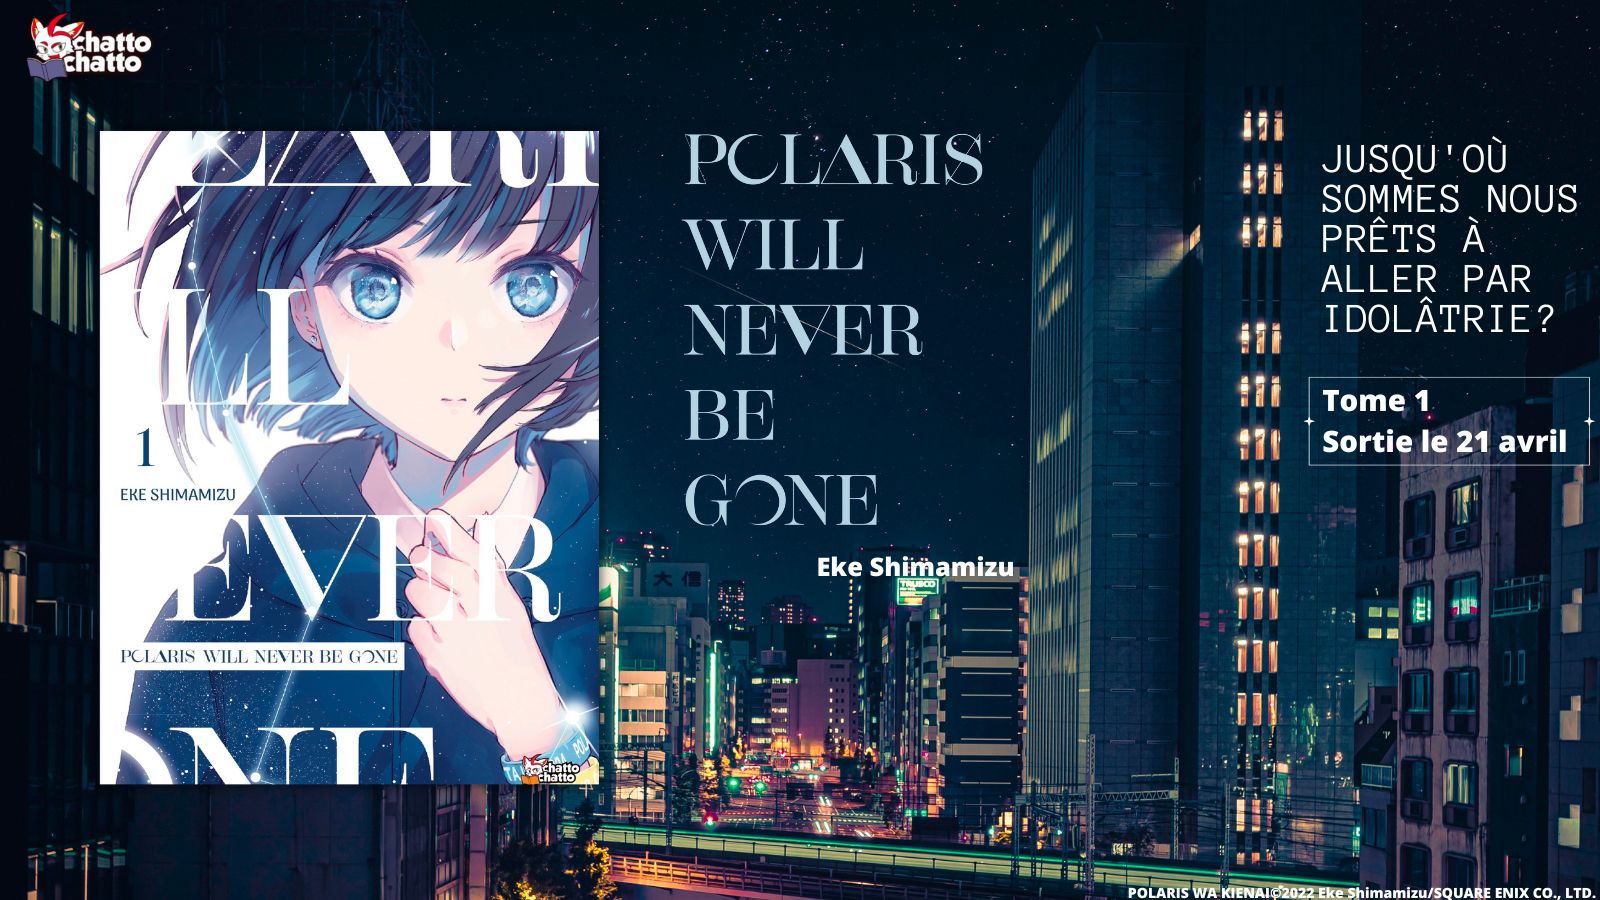 https://www.manga-news.com/public/2023/news_03/polaris_Will_Never_Be_Gone_annonce_chatto.jpg